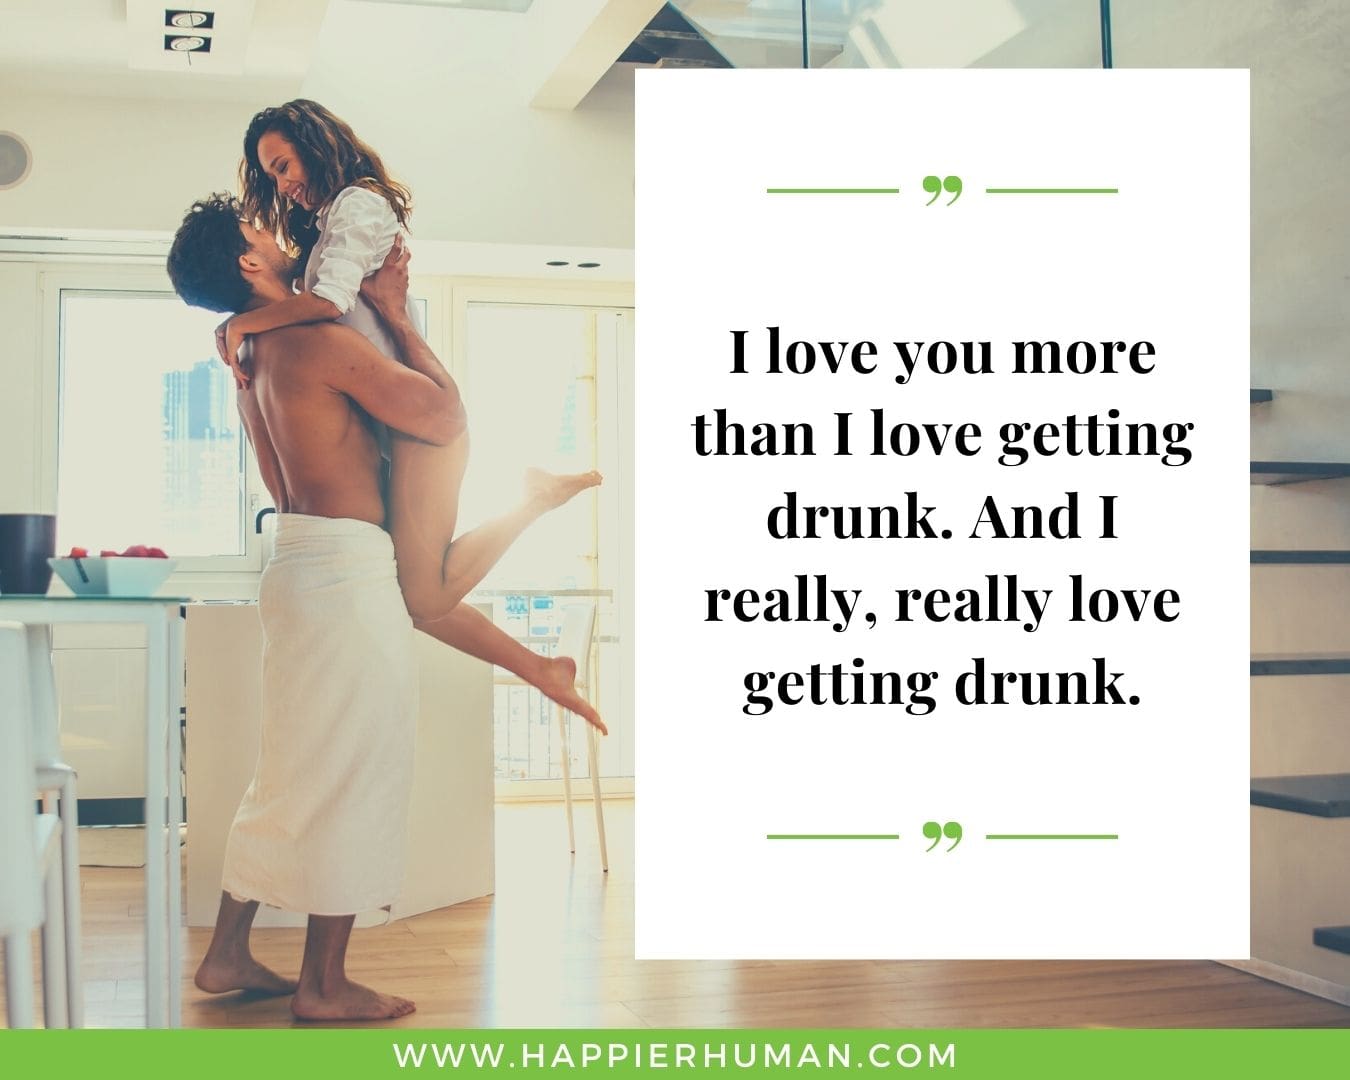 Funny Love Quotes for Her - “I love you more than I love getting drunk. And I really, really love getting drunk.”